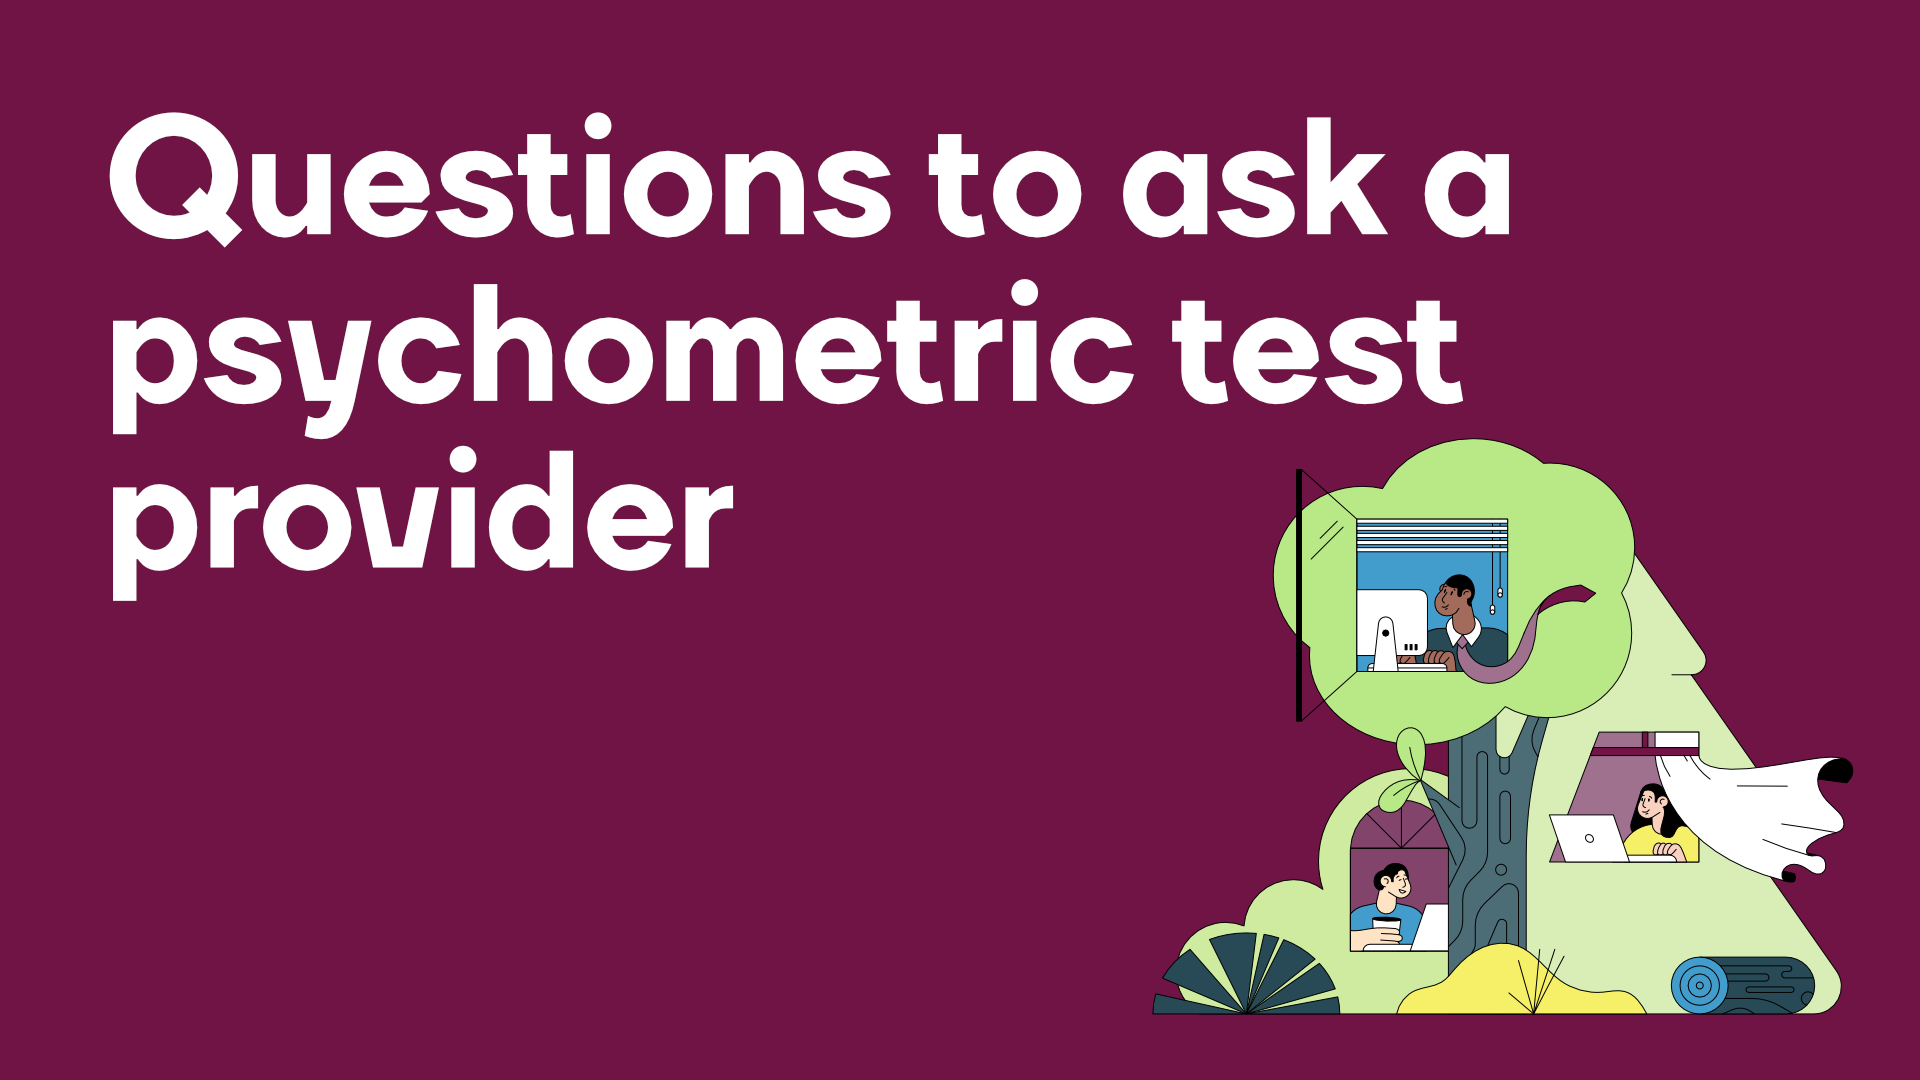 Questions to ask a psychometric test provider